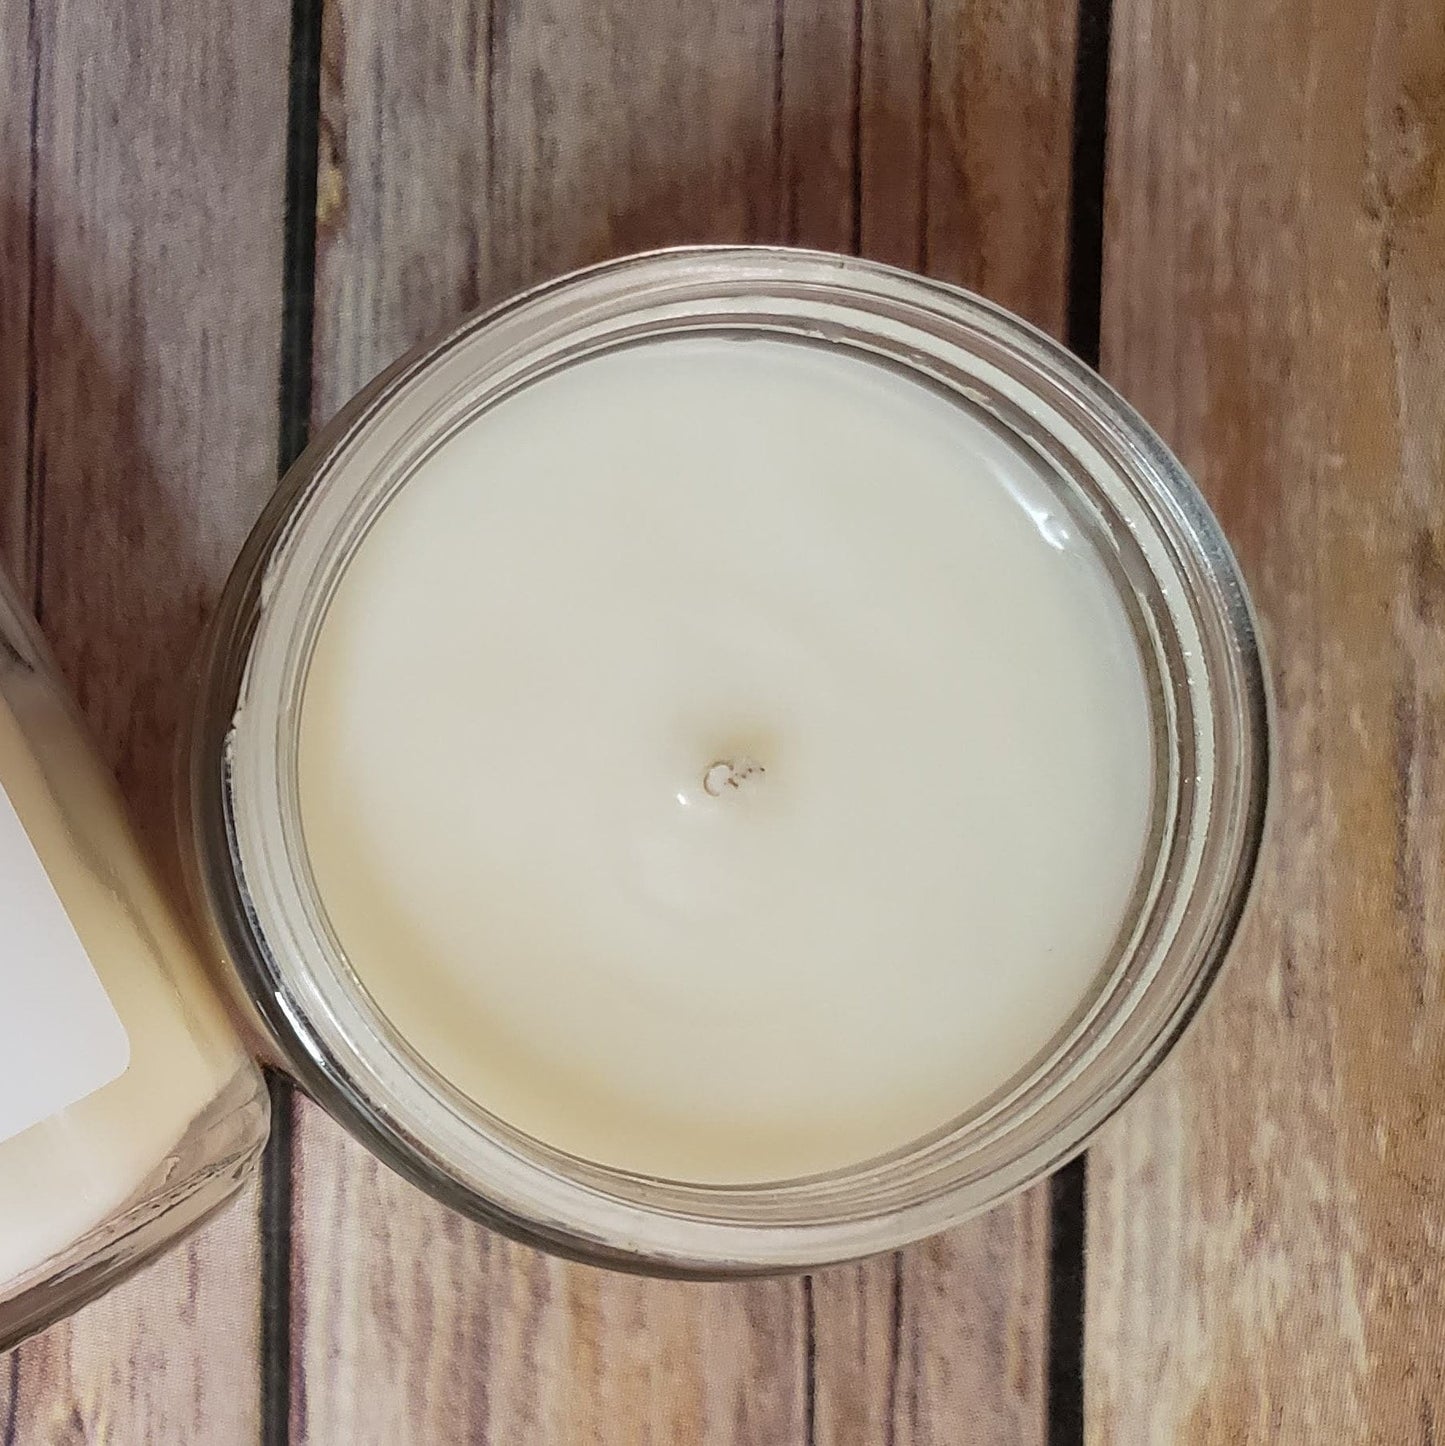 Ivy Creek No 9 | Cactus Flower & Jade Soy Blend Candle | Hand Poured | 7 oz | Cotton Wick | Small Batch | Clean Burning | Container Candle